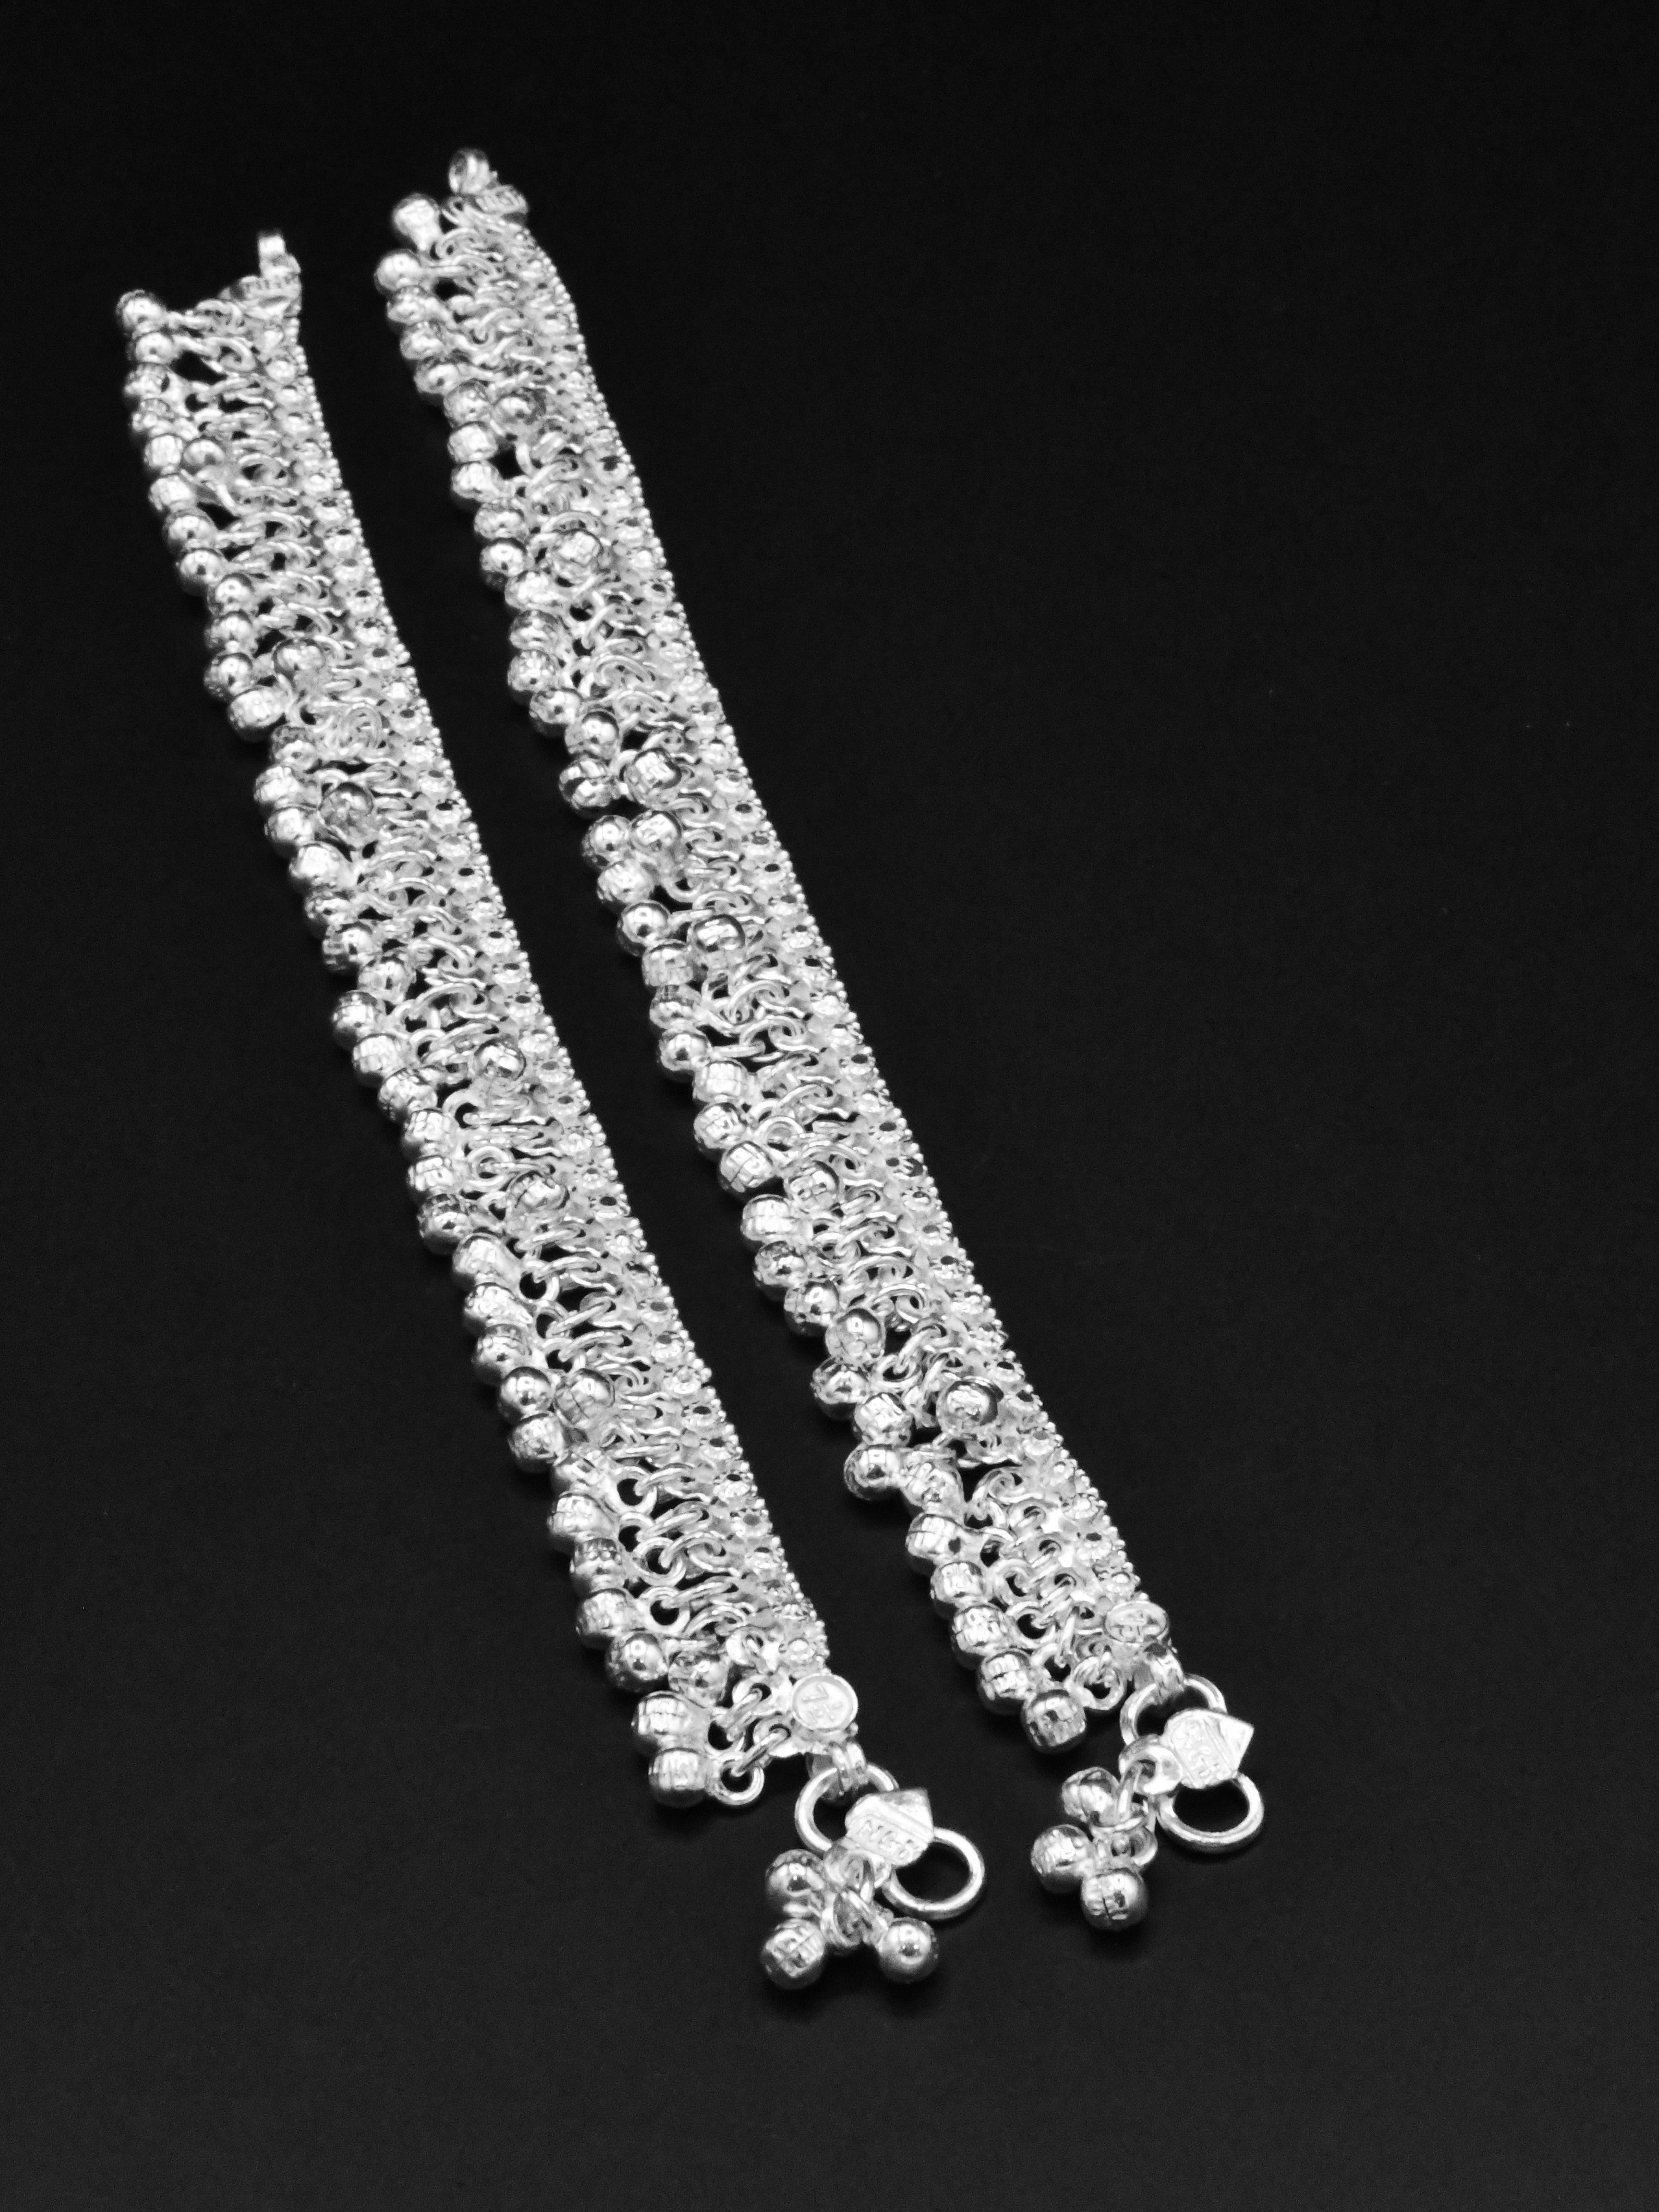 Silver 2 Piece Anklets - Roop Darshan